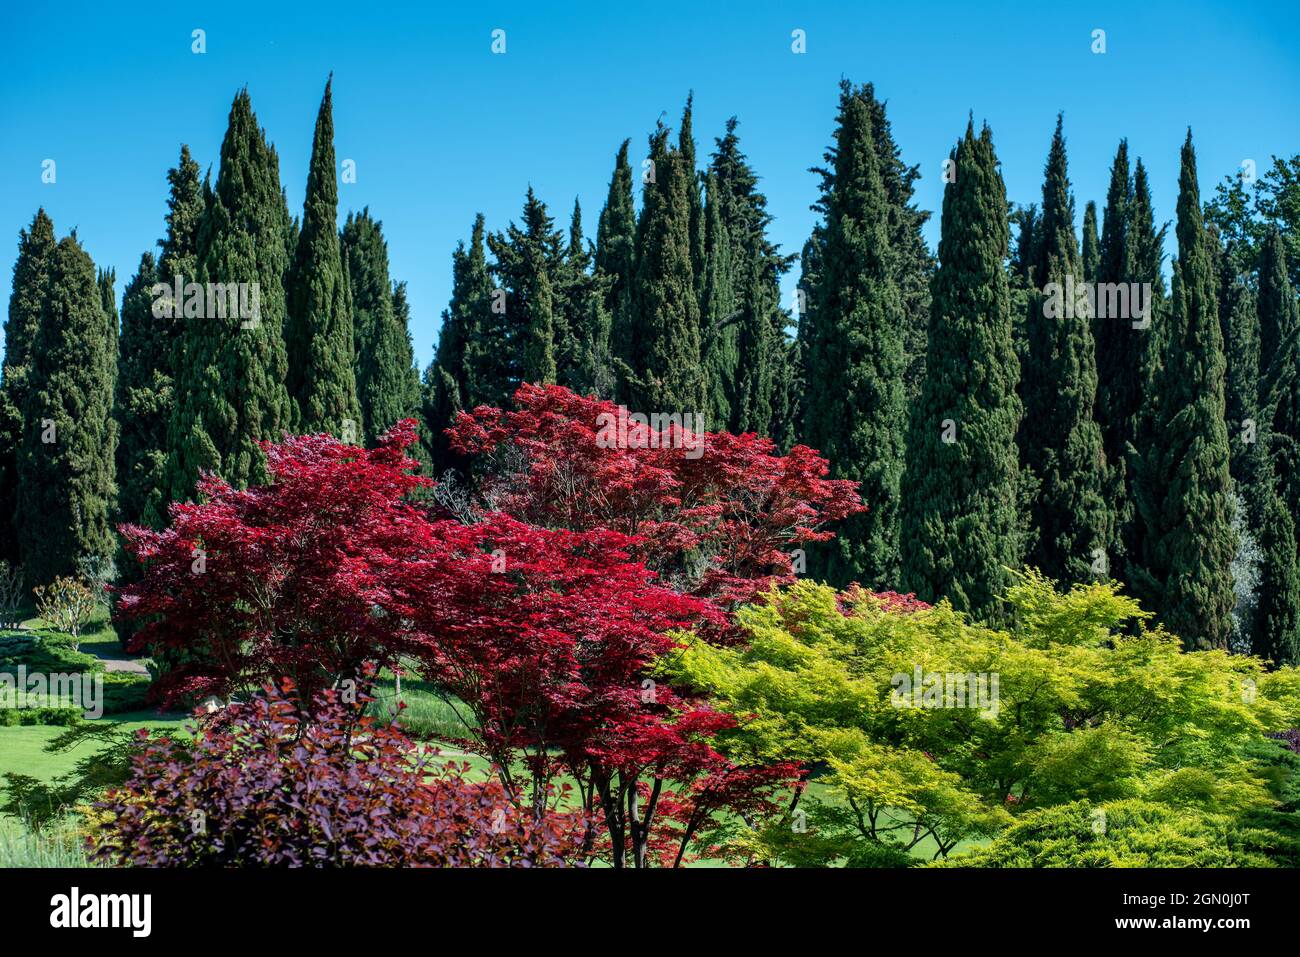 Ornamental Japanese Maple trees with their colorful red leaves in a large garden with backdrop of tall green Mediterranean cypresses against a blue sk Stock Photo